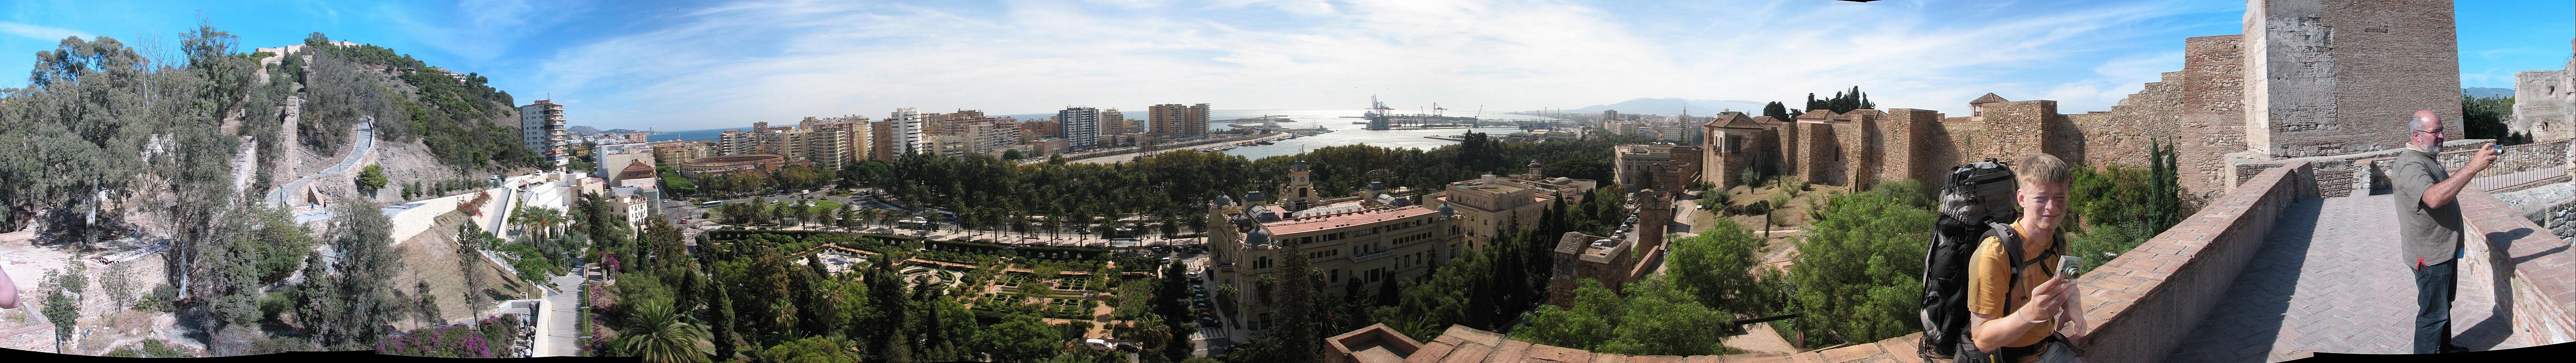 Panoramic view from Malaga castle